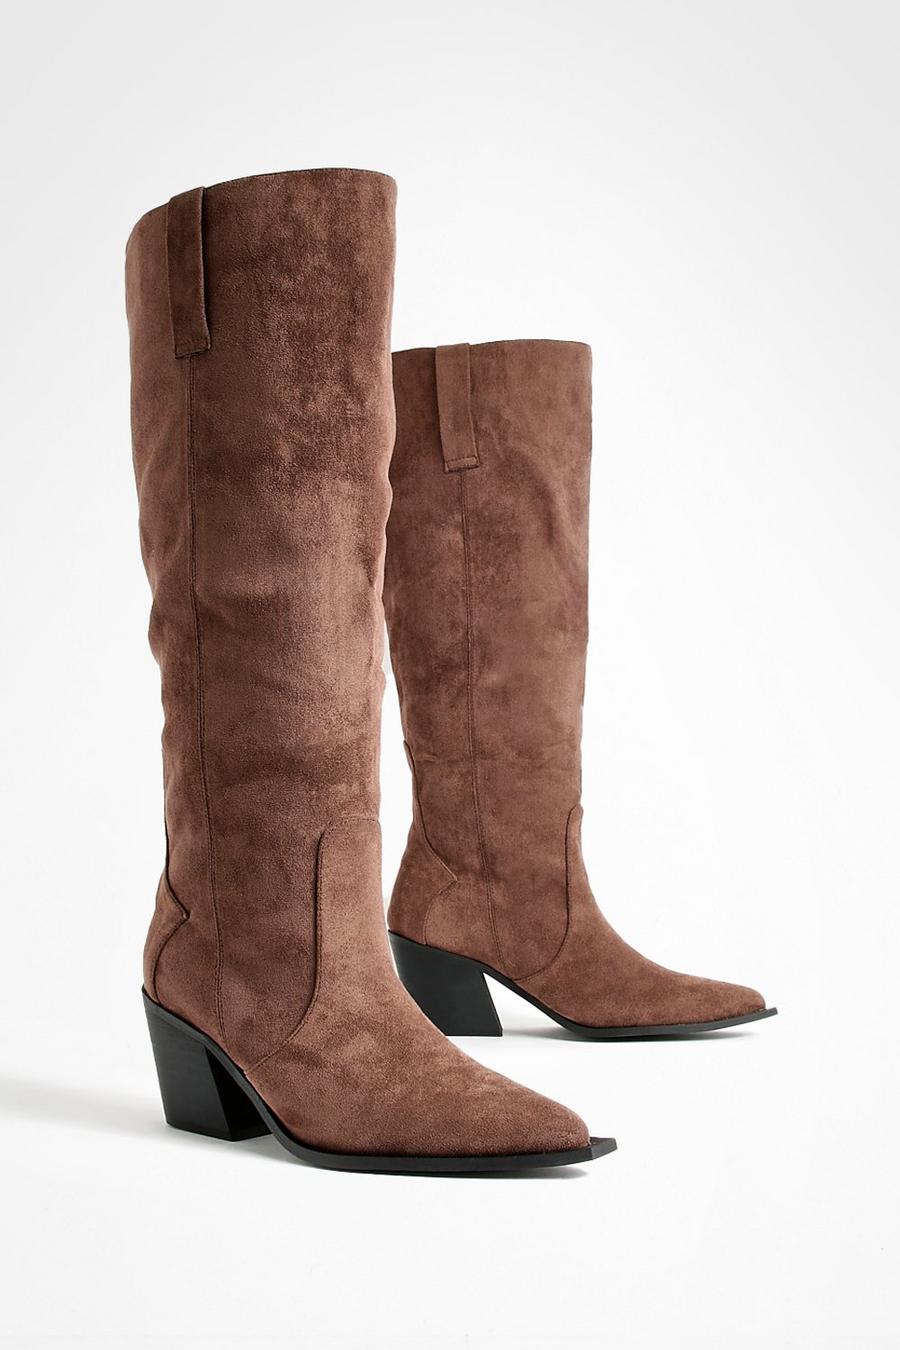 Chocolate marron Wide Fit Western Cowboy Knee High Boots 